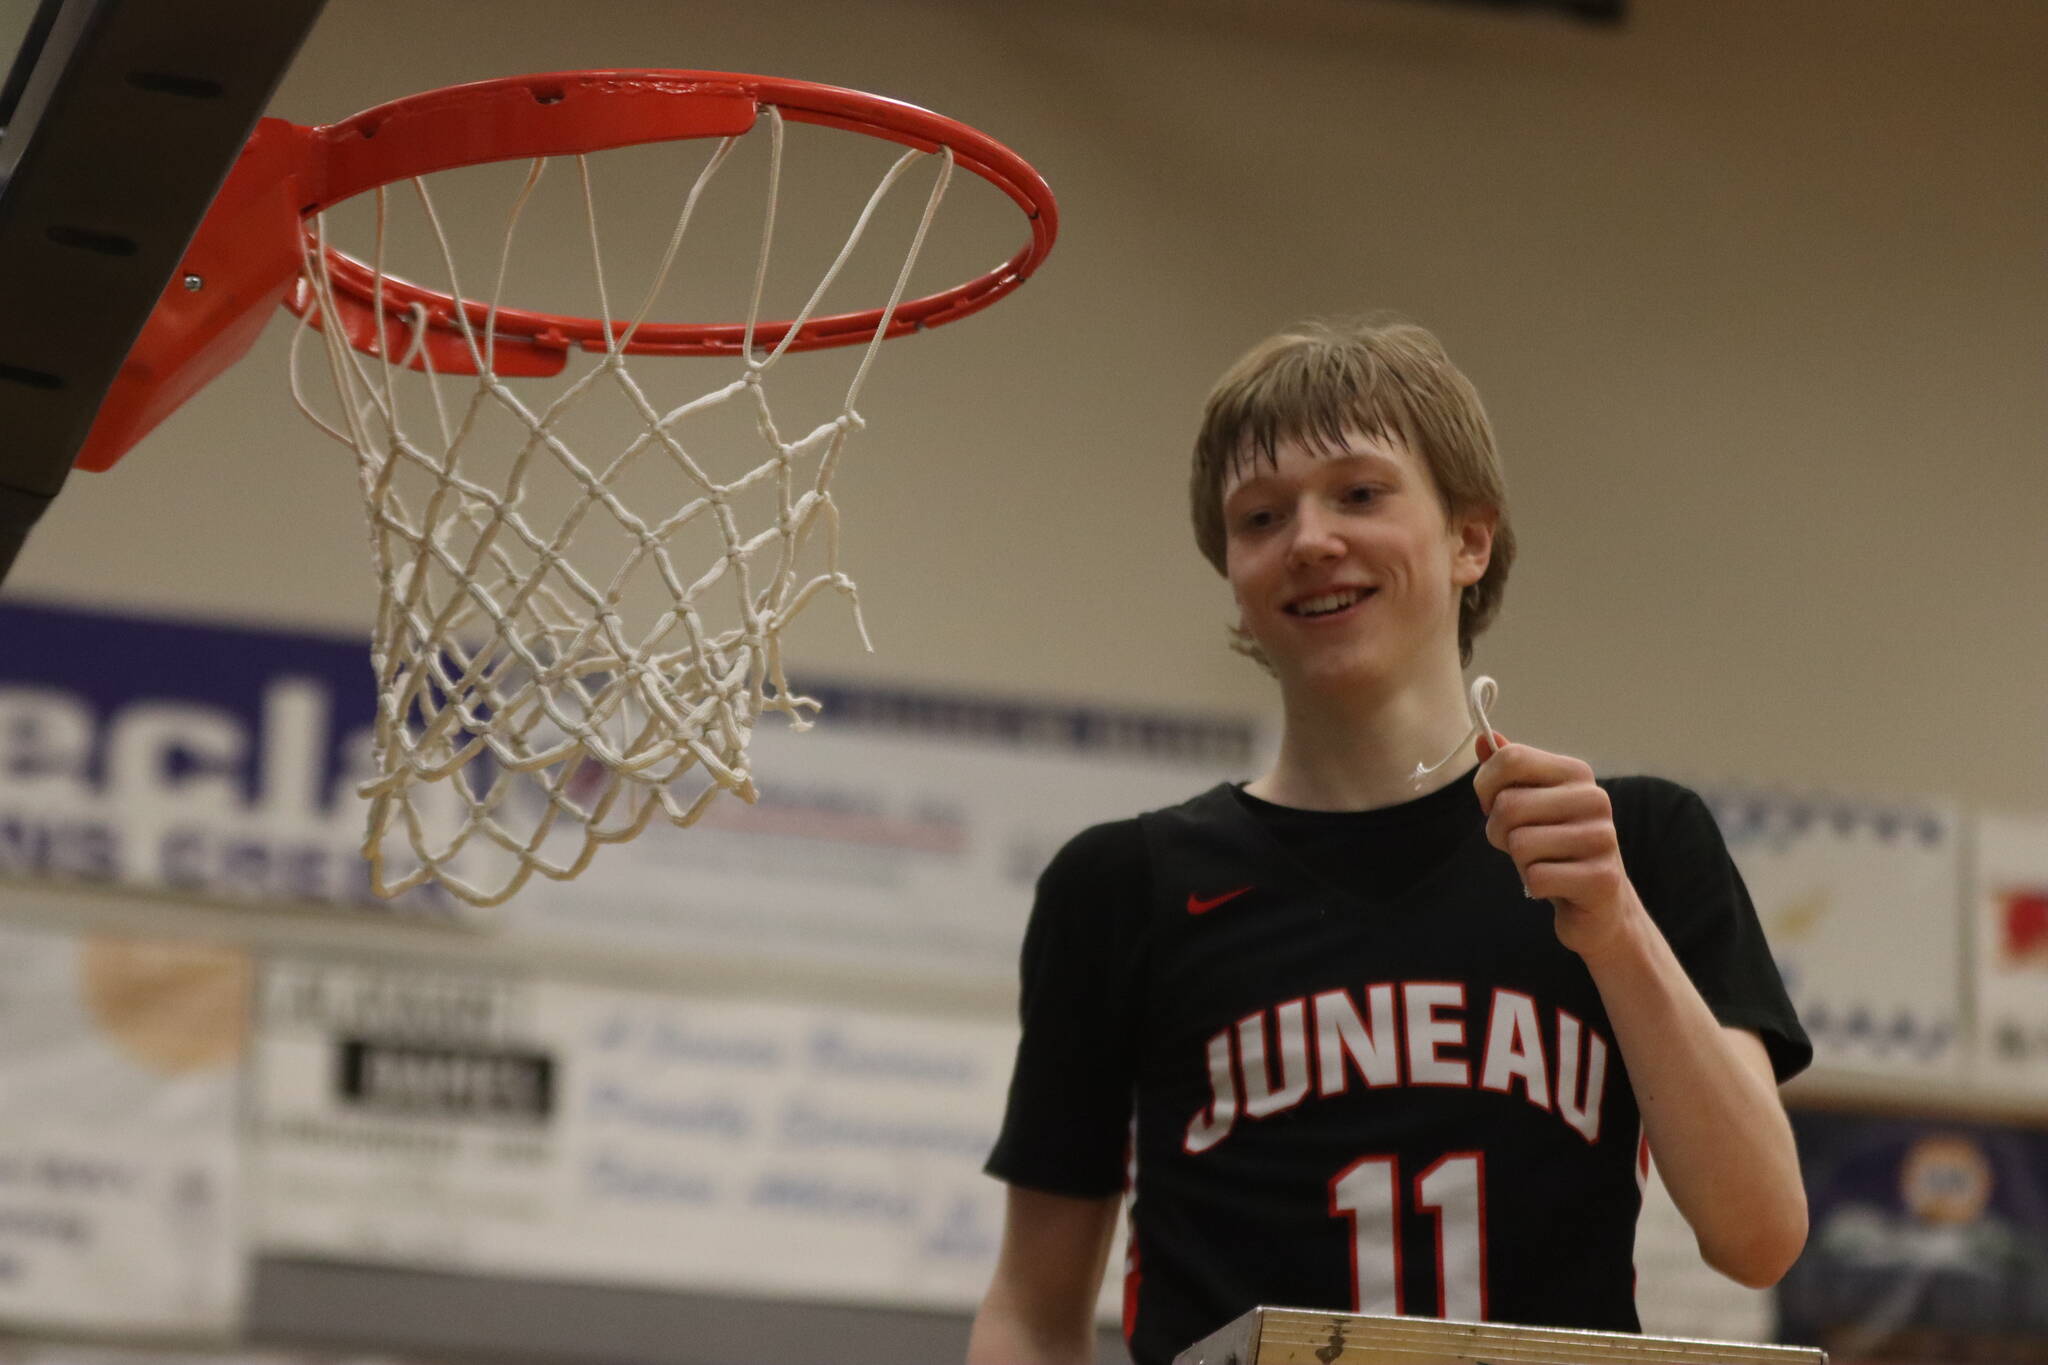 JDHS junior Sean Oliver (11) holds a piece of the net after a win against Ketchikan High School, making the Crimson Bears this year’s 4A Region V Tournament champs. Oliver finished the game with 30 points, six 3-pointers and a fourth quarter slam dunk. (Jonson Kuhn / Juneau Empire)